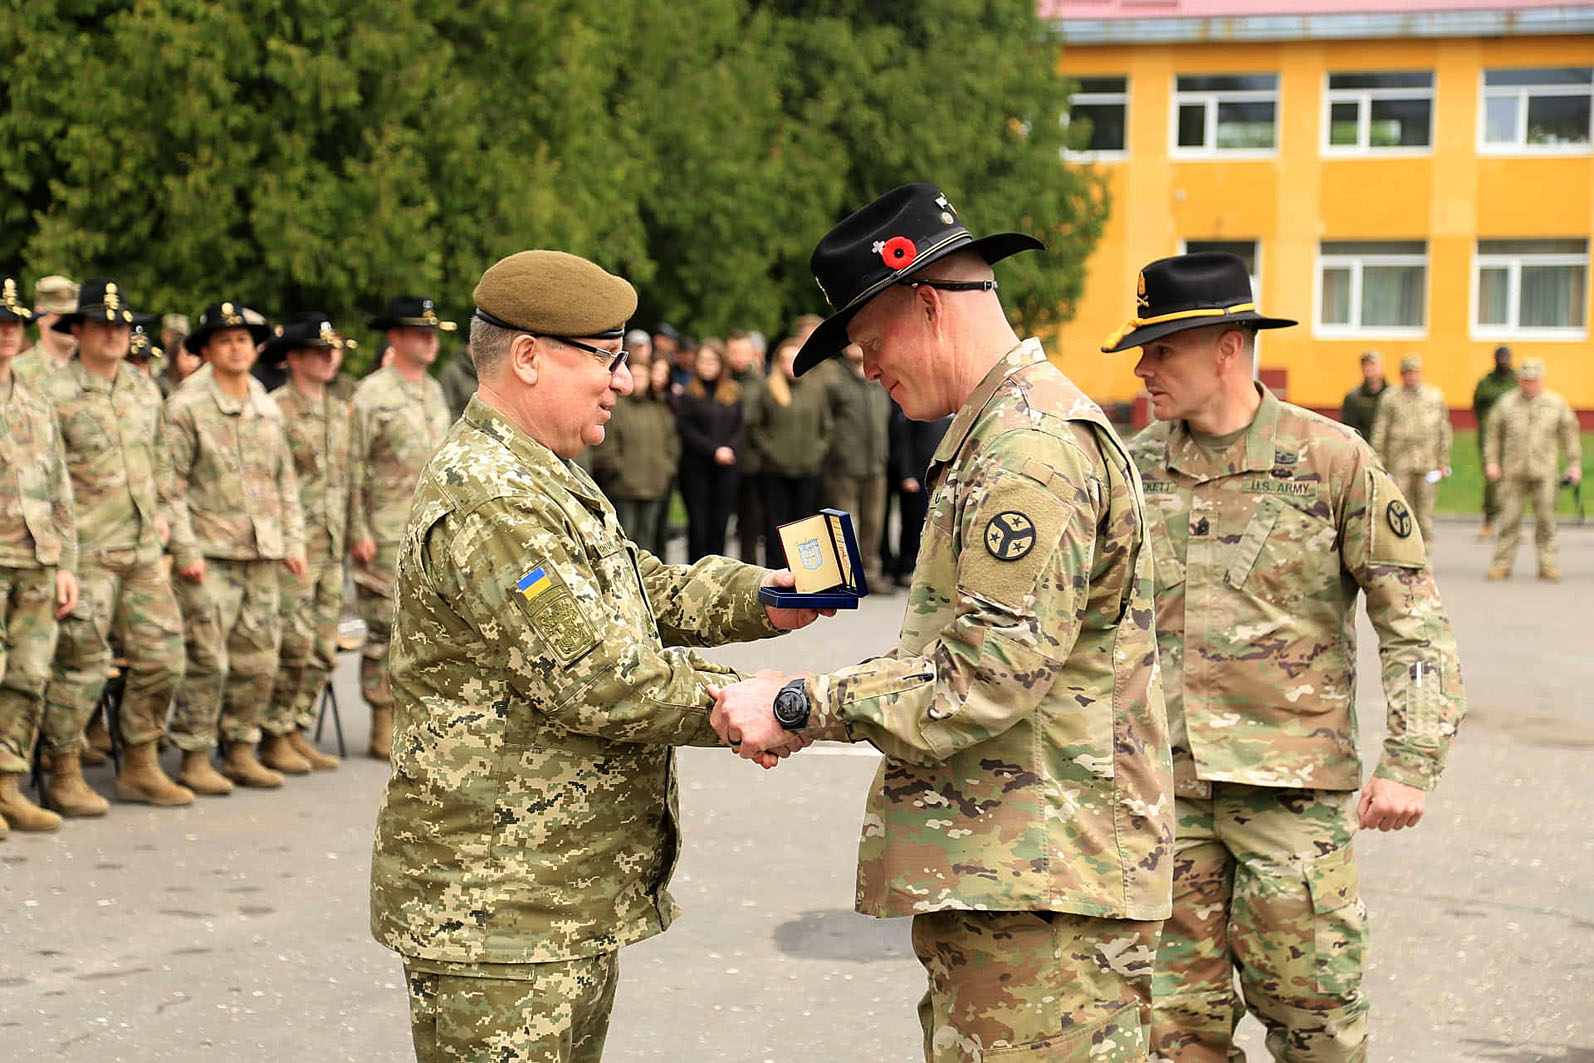 Ukraine&#8217;s Armed Forces Lieutenant General Pavlo Tkachuk decorates U.S. Army personnel during the transfer of authority ceremony of the JMTG-U training mission at the Yavoriv training range on May 2, 2019.